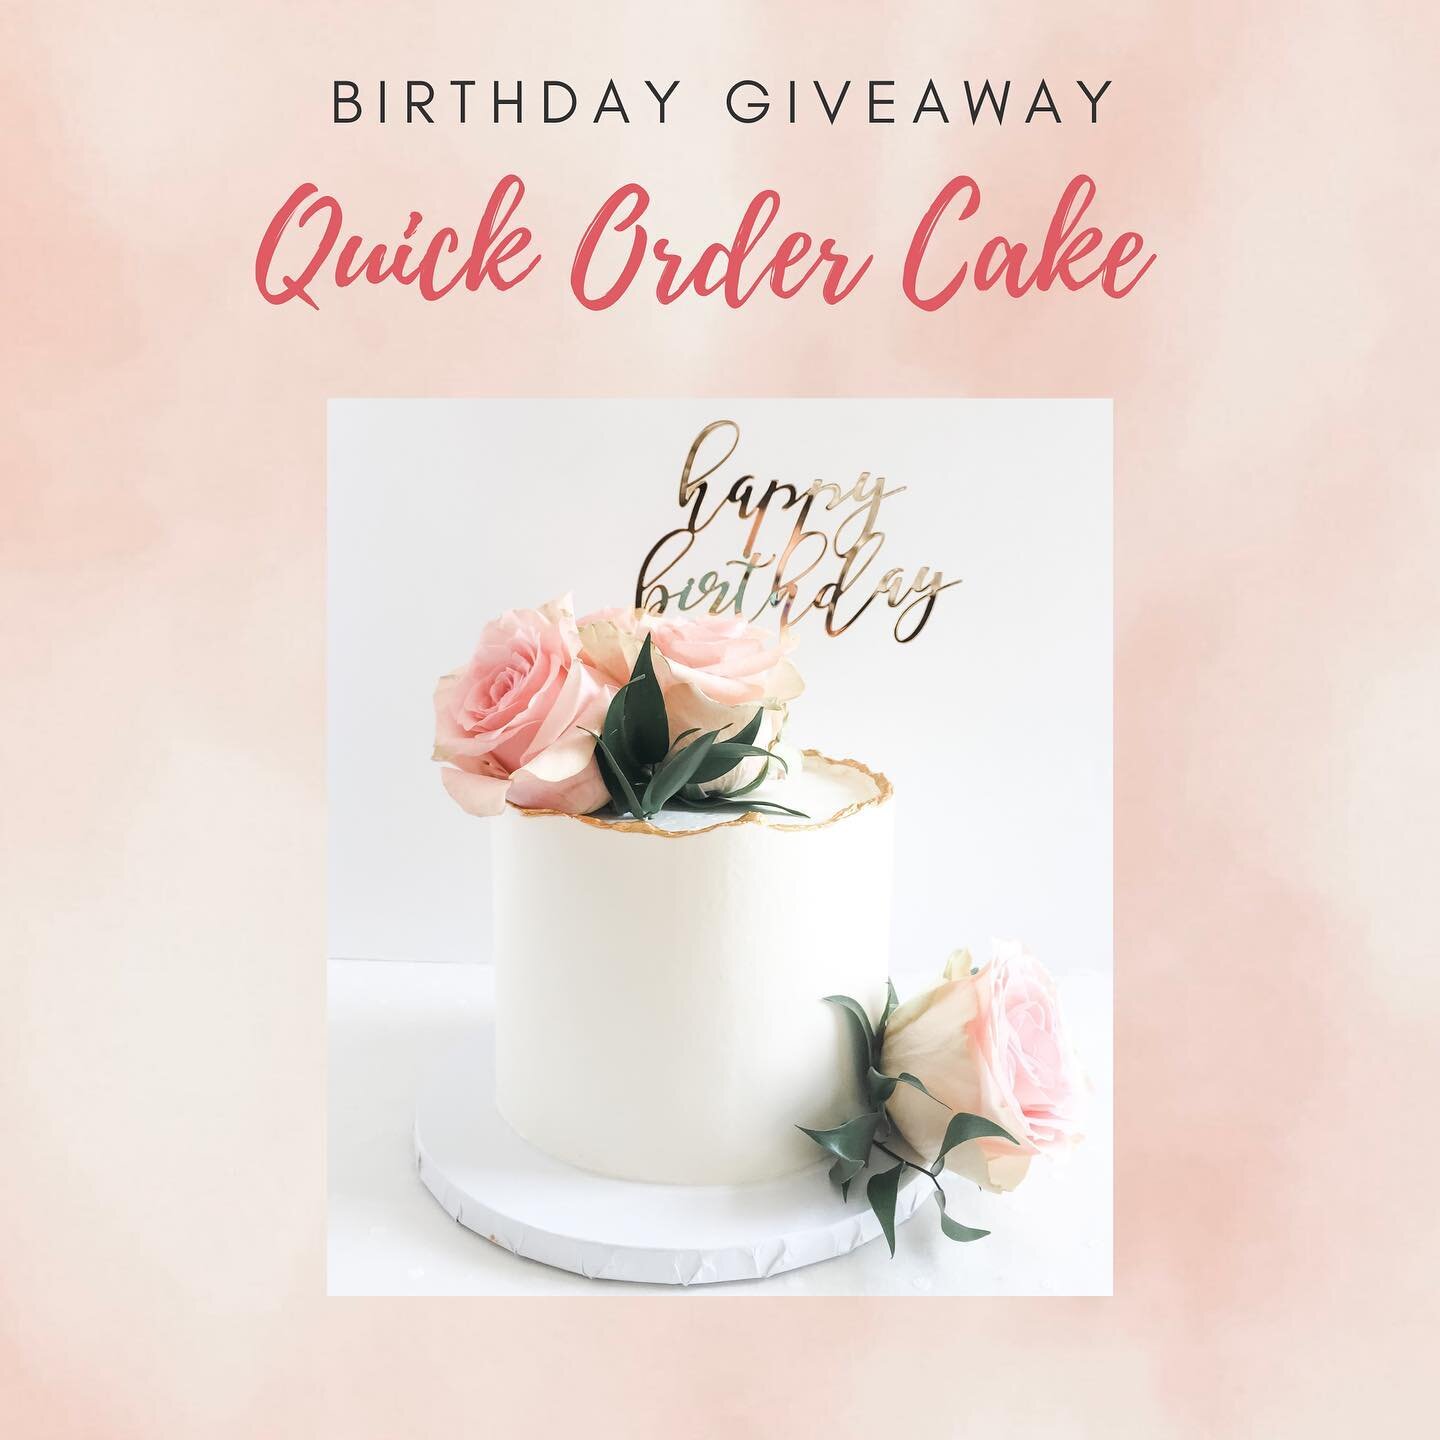 ** CLOSED **
Winner: @vesco_xoxo 

🎂BIRTHDAY GIVEAWAY 🎂

It&rsquo;s my birthday and I&rsquo;ll cry if I want to&hellip; but I&rsquo;m having my cake and giving it away too! For my 33rd birthday weekend, we&rsquo;re doing 3 days of cake giveaways!

